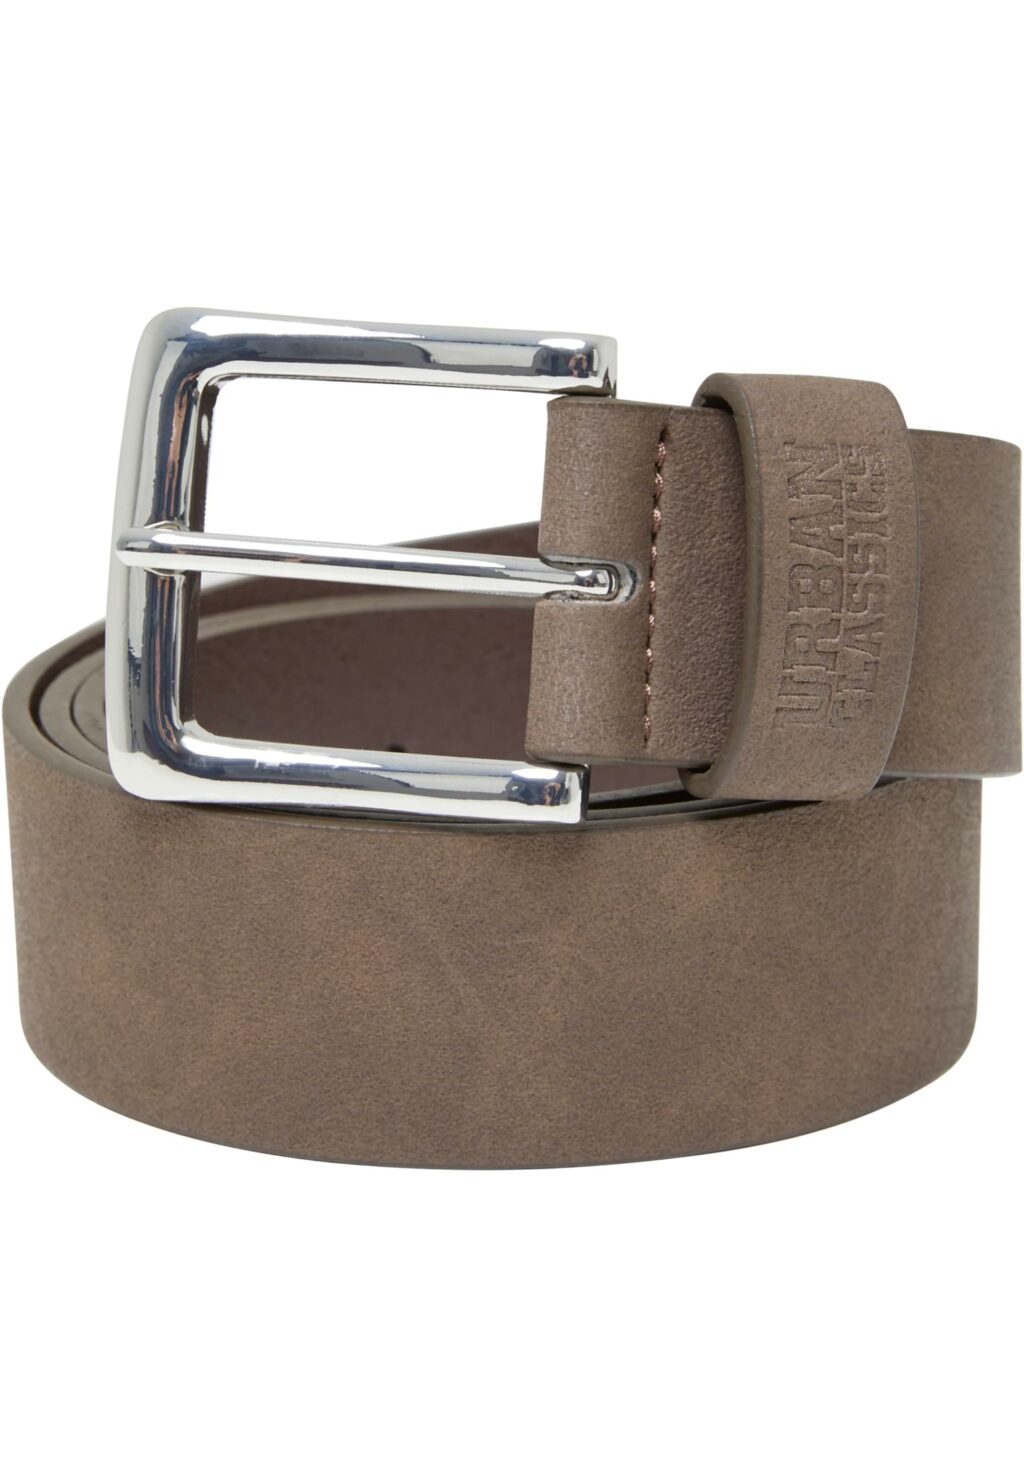 Suede Leather Imitation Belt brown/silver TB6810